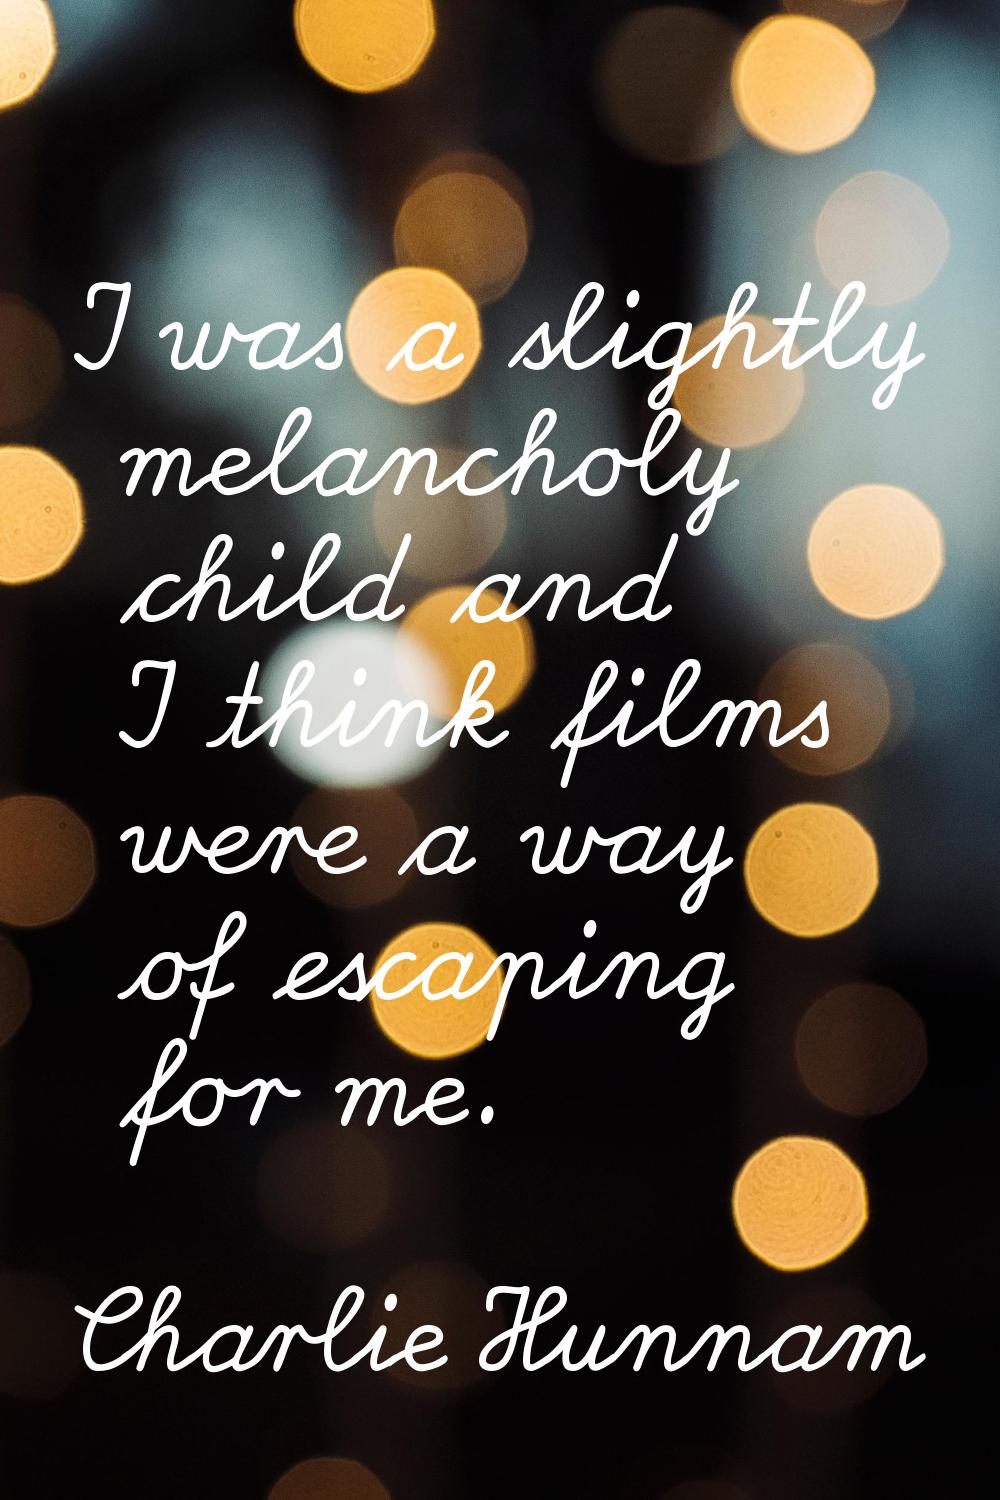 I was a slightly melancholy child and I think films were a way of escaping for me.